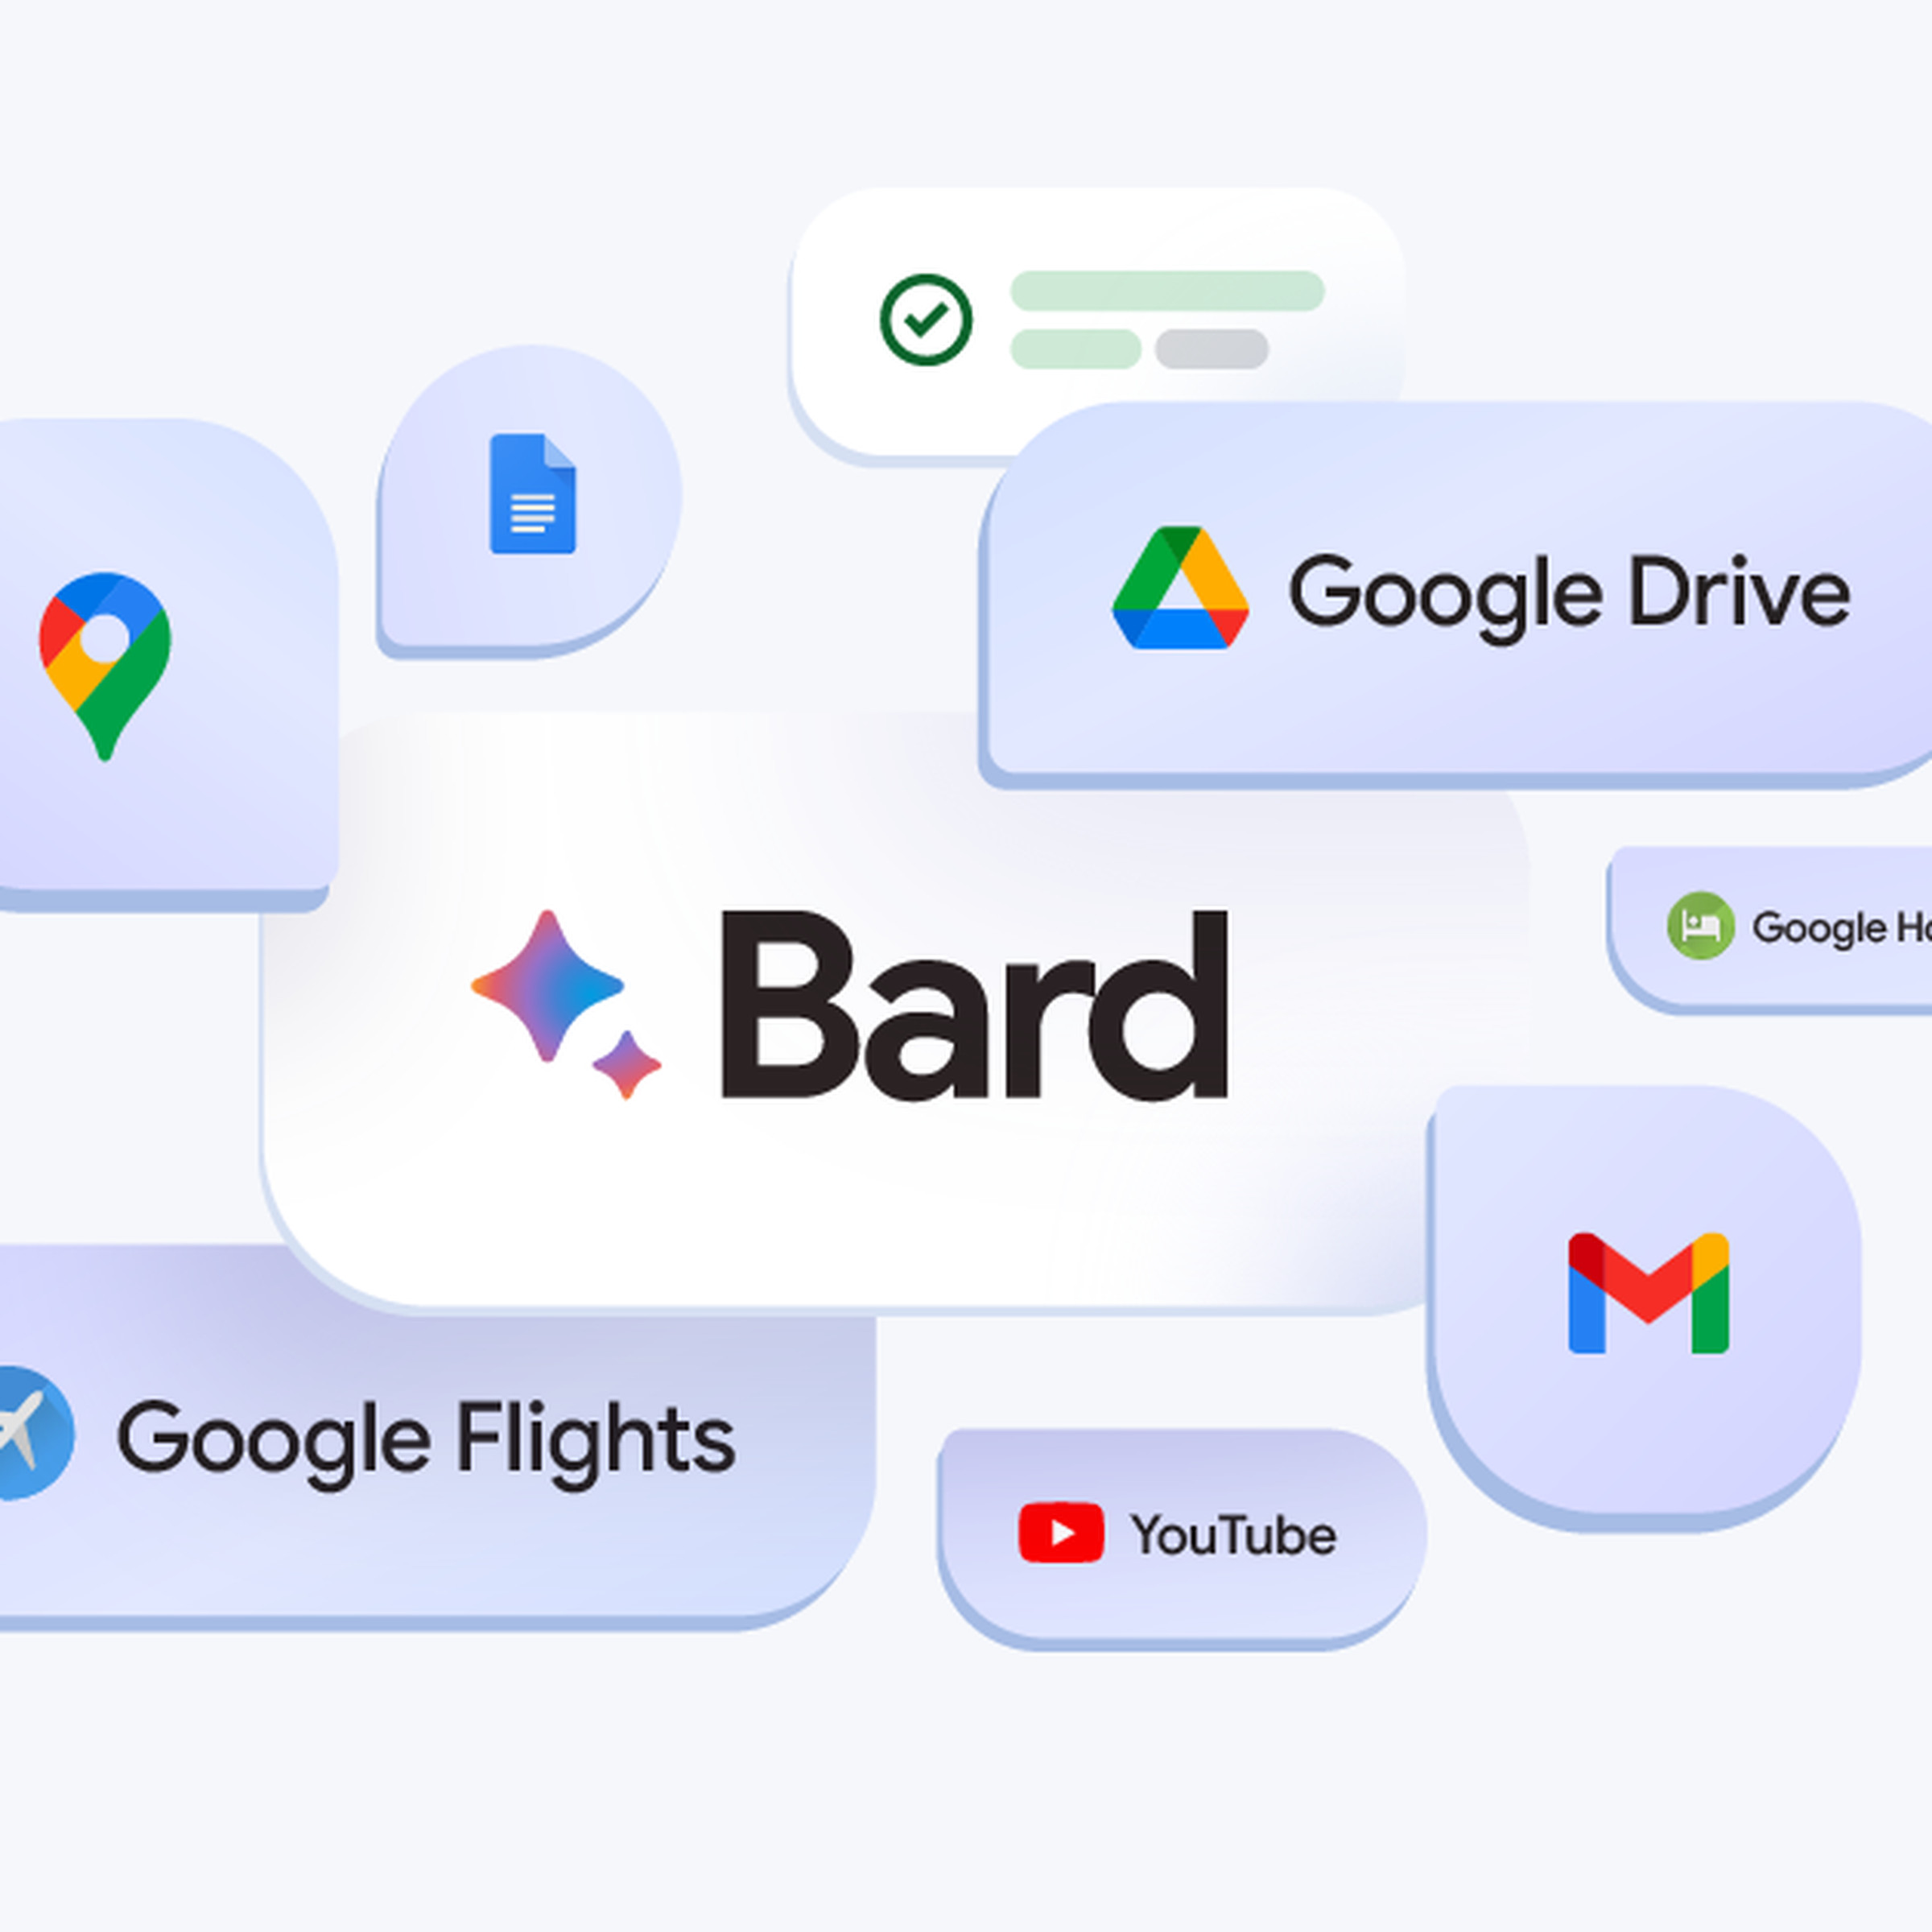 A graphic showing Bard’s logo with Gmail, Drive, Docs, and other apps